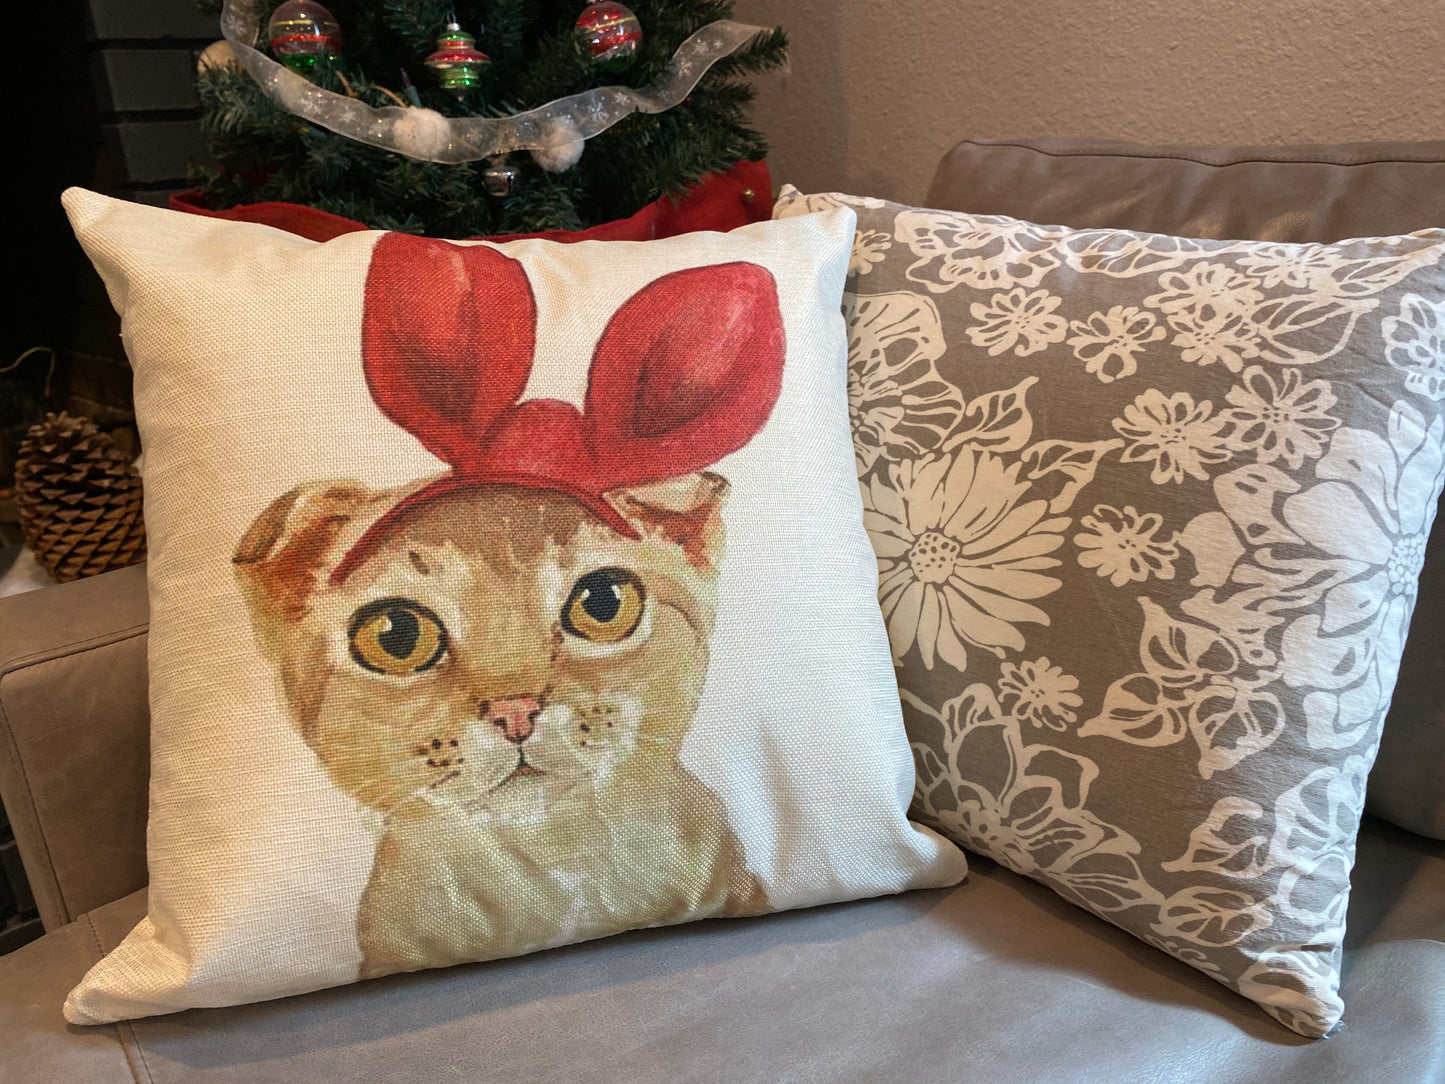 Lovely Orange Cat With Red Bunny Ear Pillow Cover